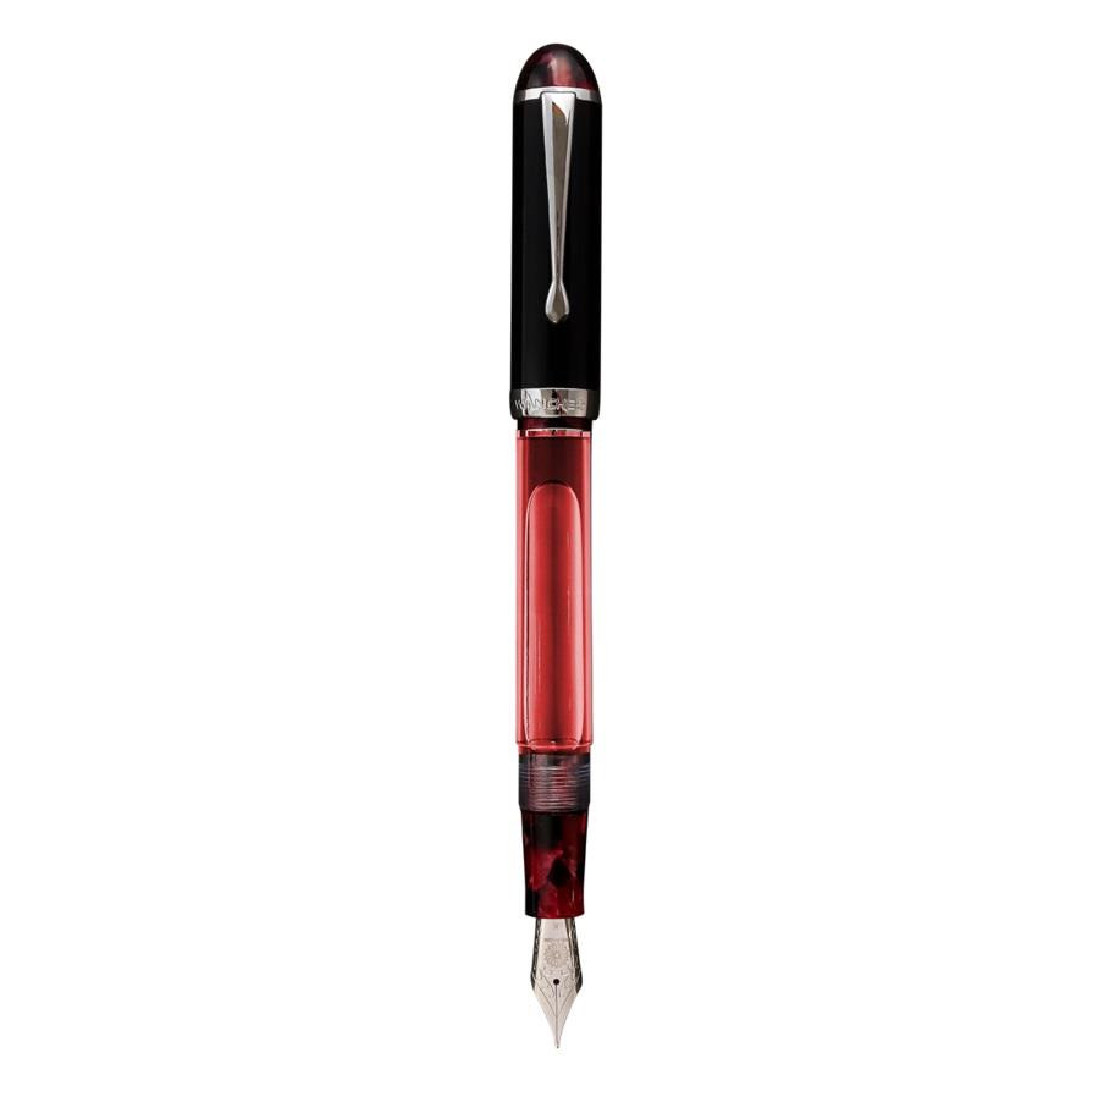 Wancher Crystal Ruby red fountain pen